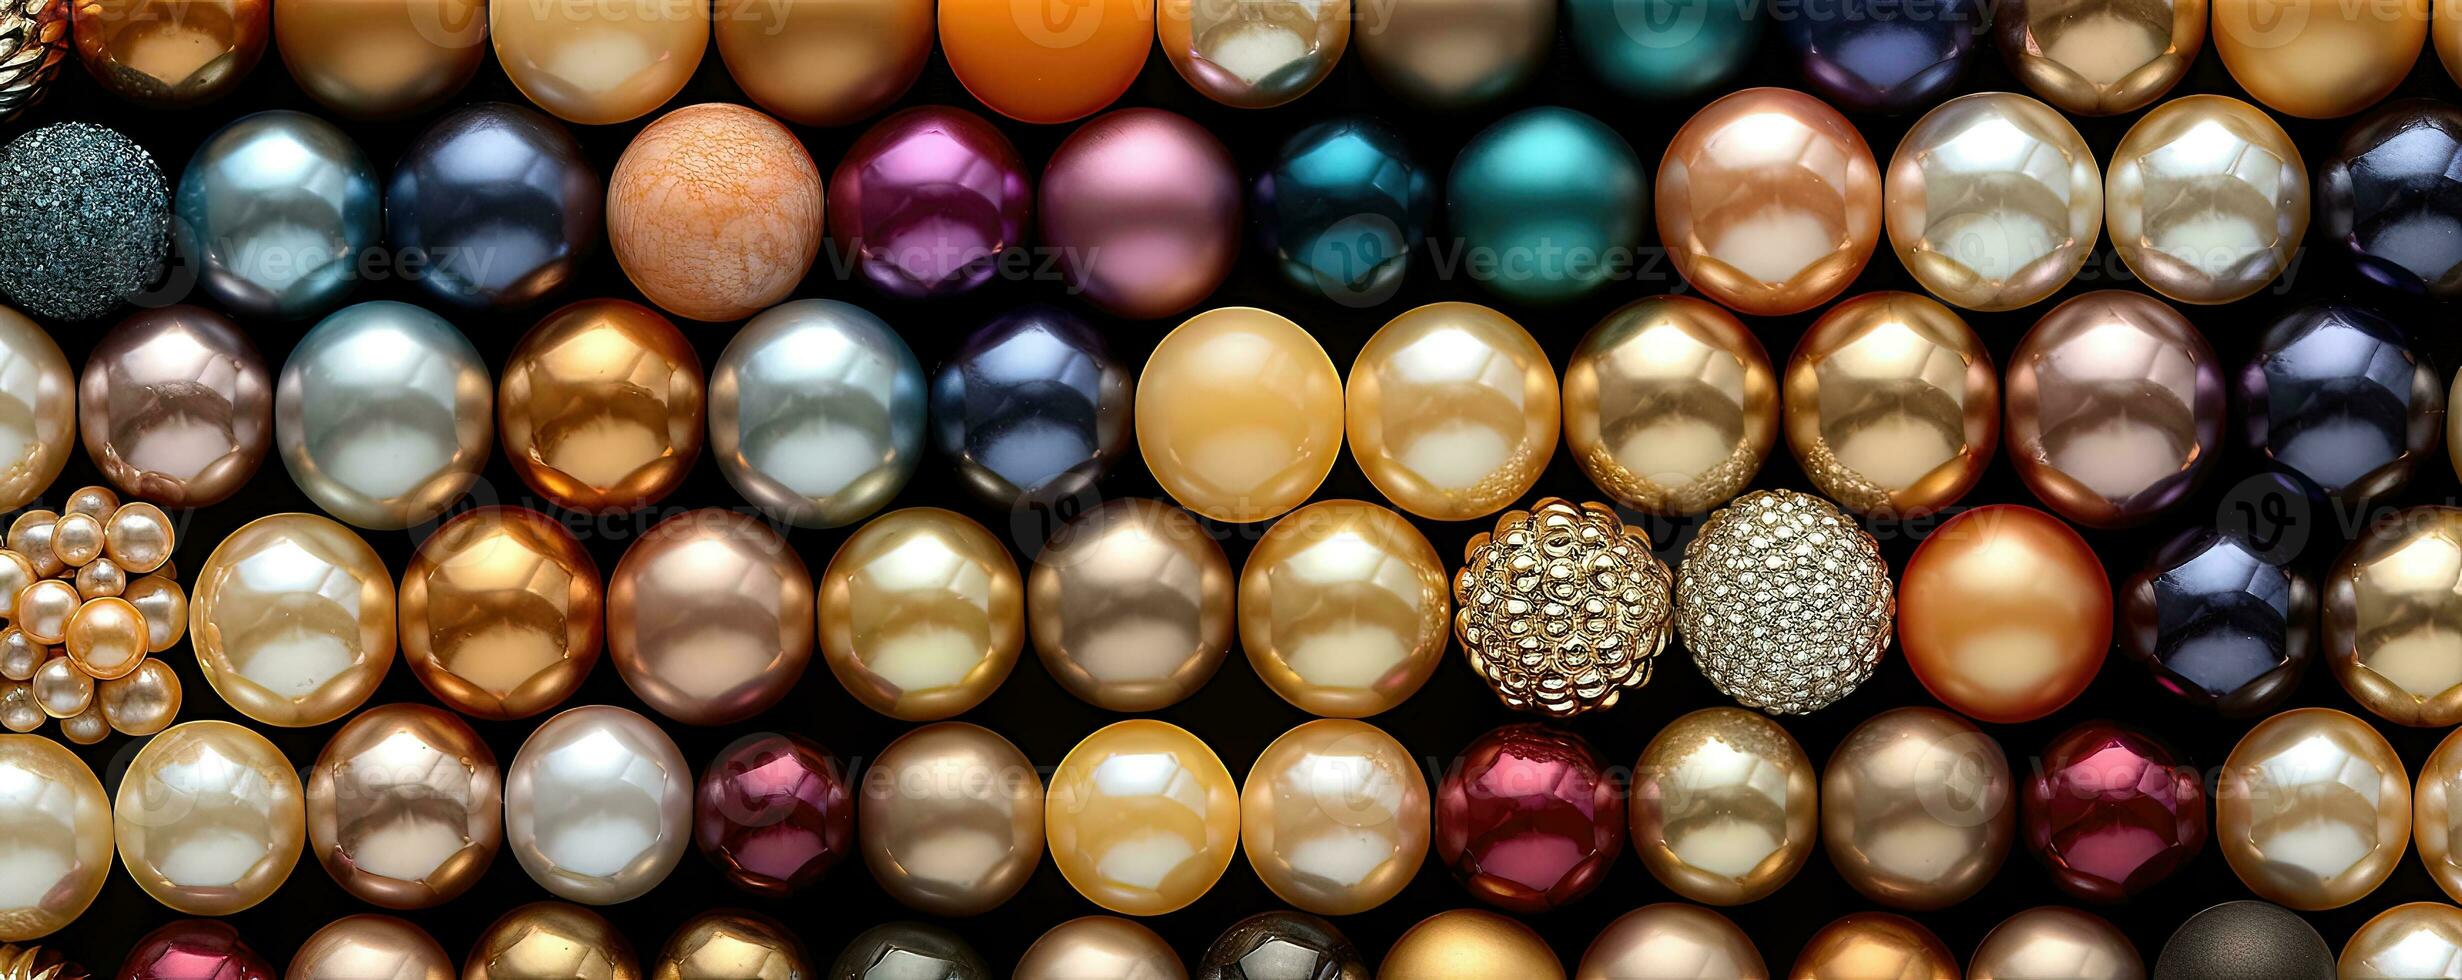 Multicolored beads background photo